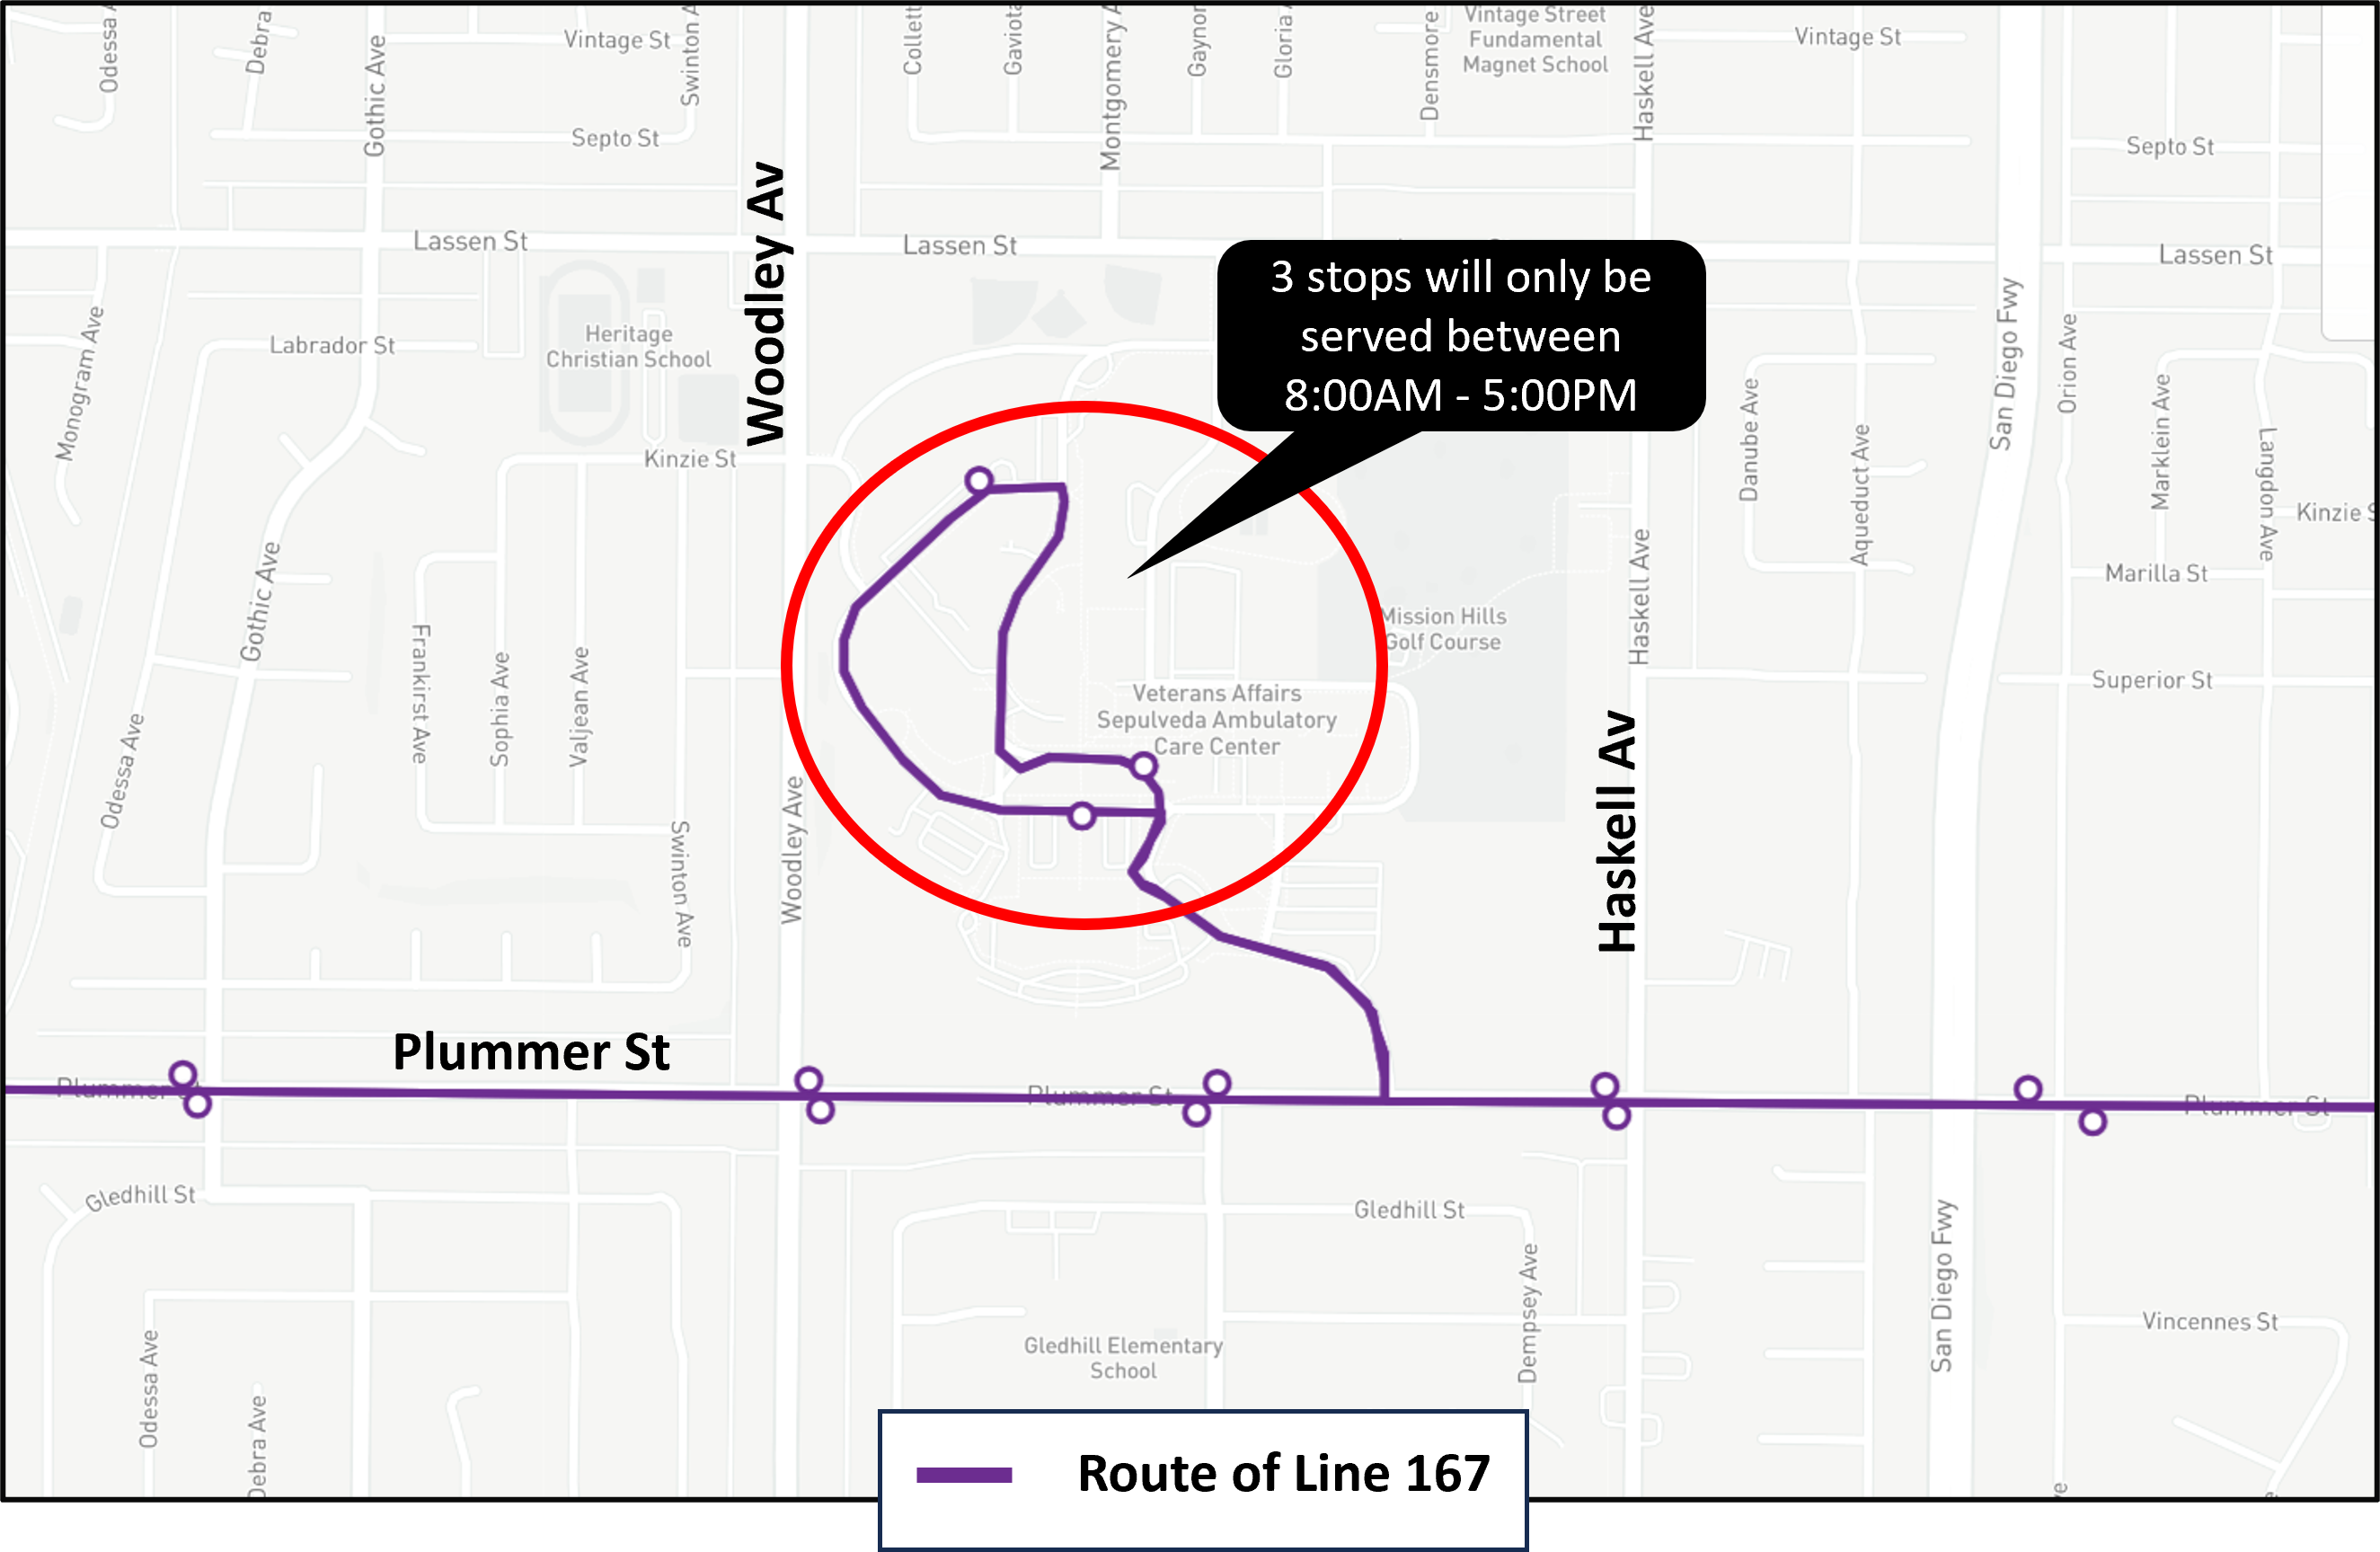 a graphic map showing a visual representation of the described changes to Line 167